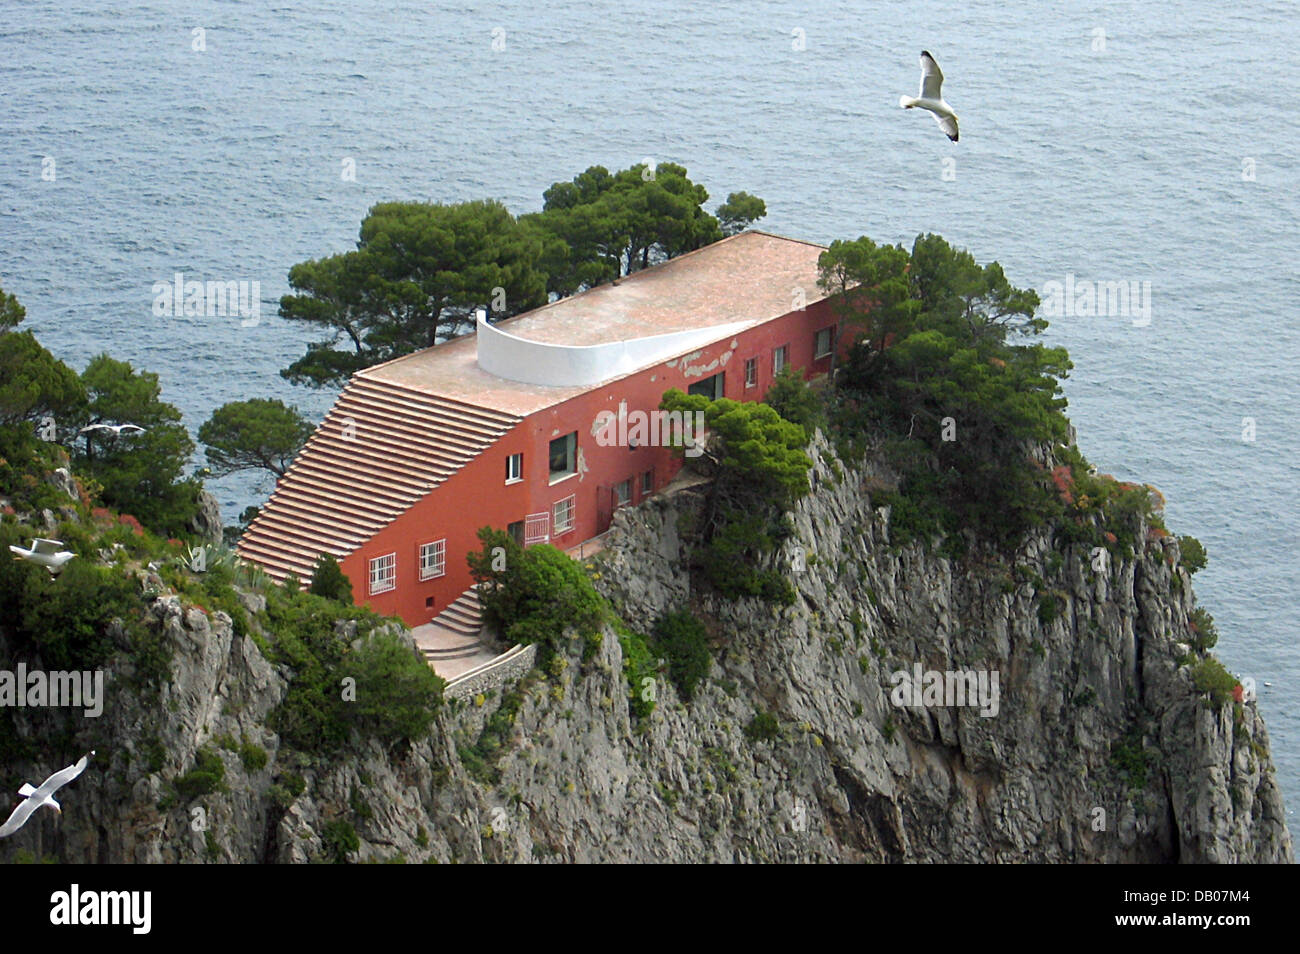 The picture shows the famous Casa Malaparte, the house of writer Curzio Malaparte, on the island of Capri, Italy, 19 May 2005. Malaparte built the villa at the Cape Massullo in the 1930ies and referred to it as 'una casa come me: triste, dura, severa' (a house of my kind: sad, hard, strict). Following year longs legal proceedings it is again in private ownership after it was willed Stock Photo